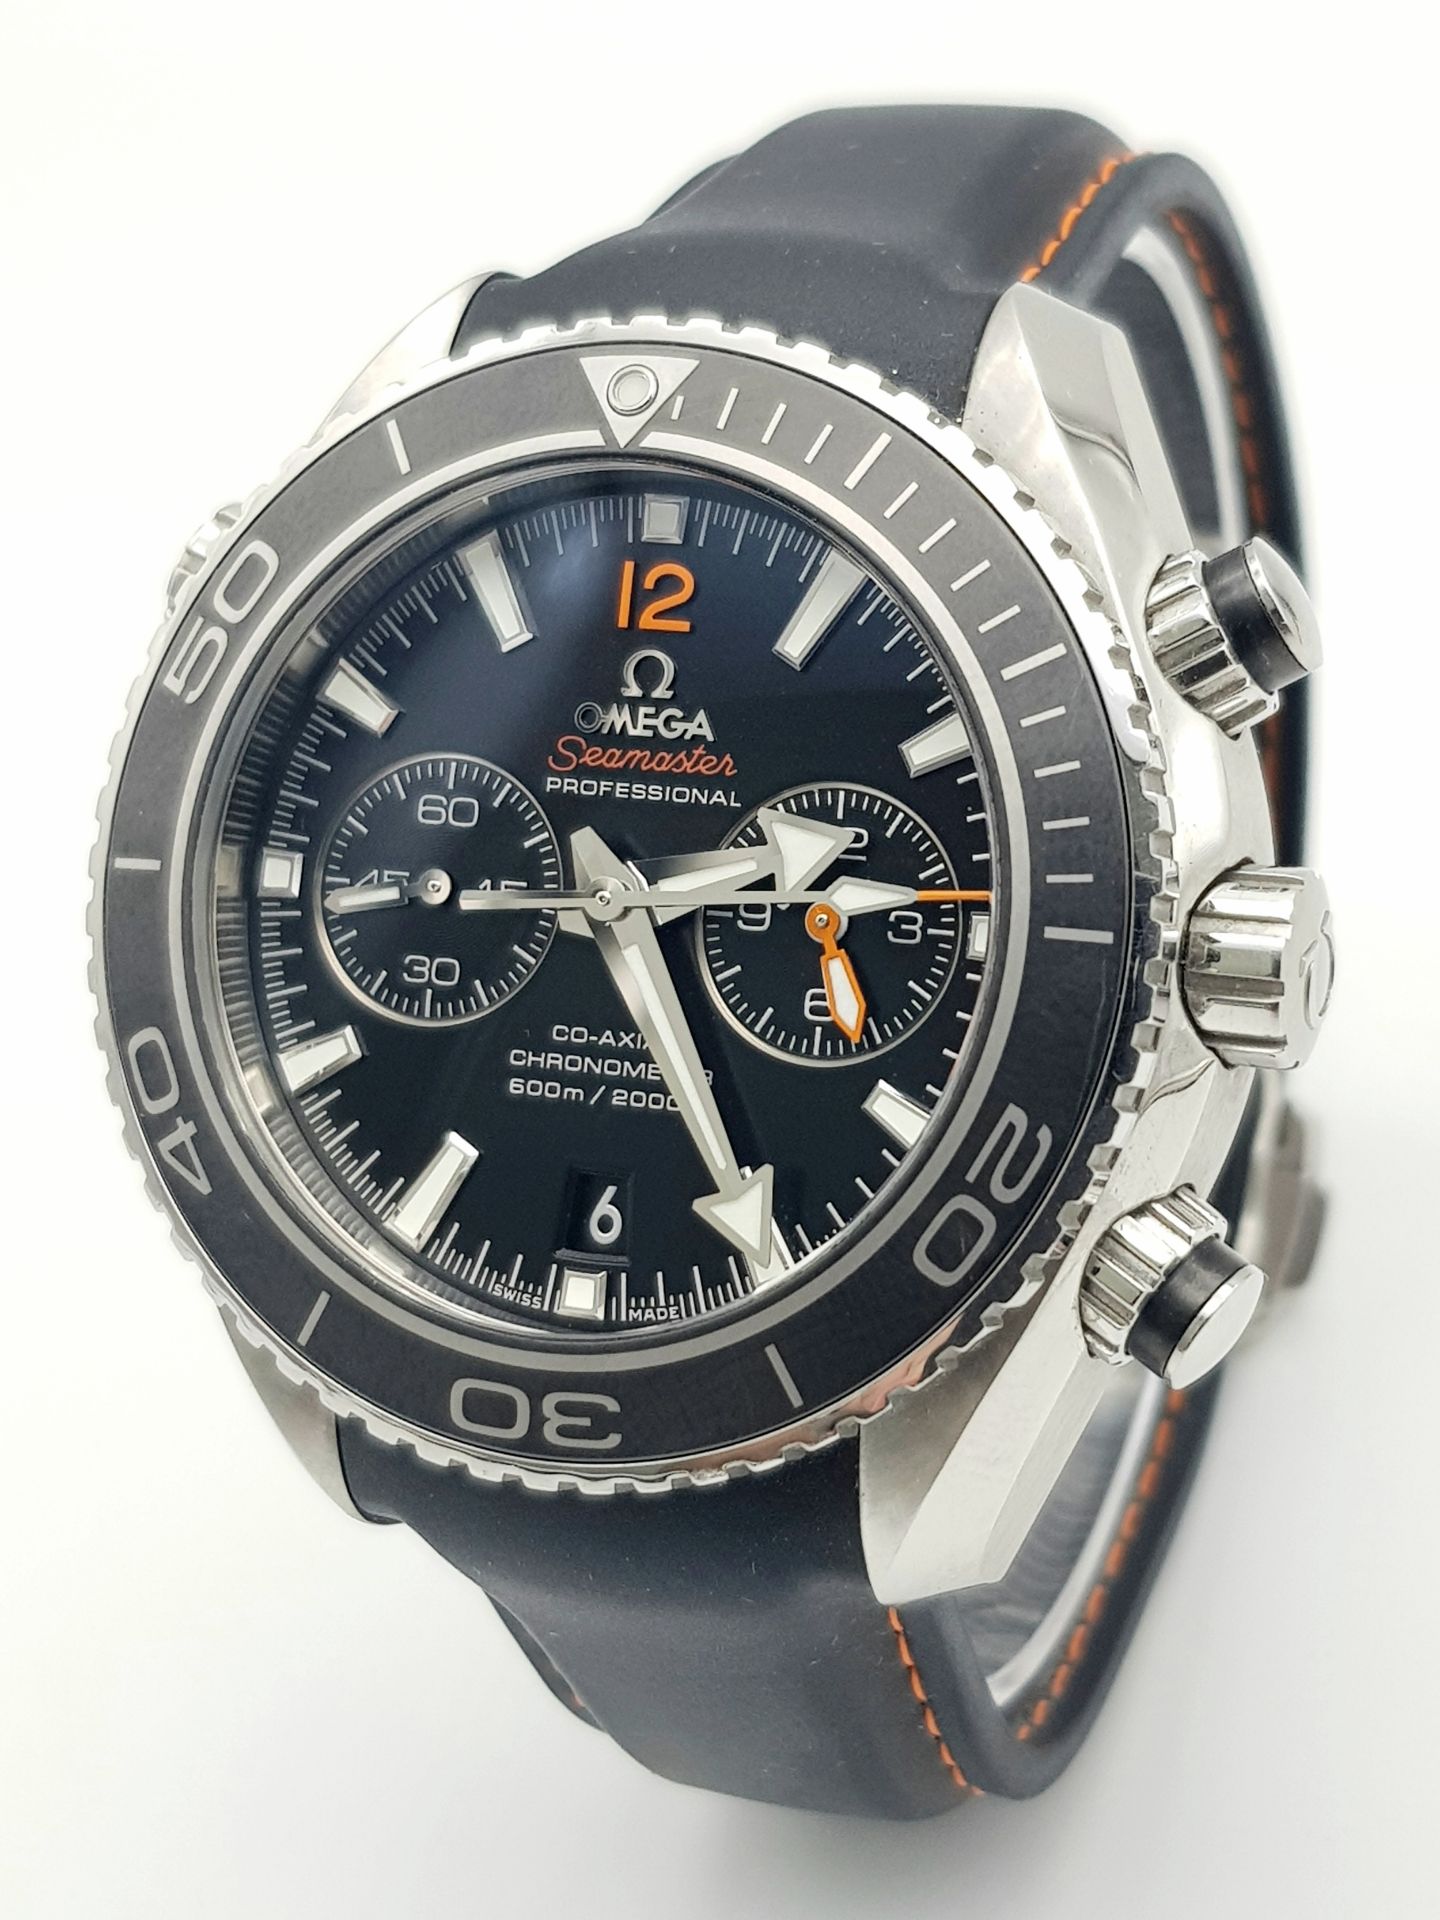 A FANTASTIC EXAMPLE OF AN OMEGA "SEAMASTER" PROFESSIONAL CO-AXIAL CHRONOMETER WITH 2000FT LIMIT .